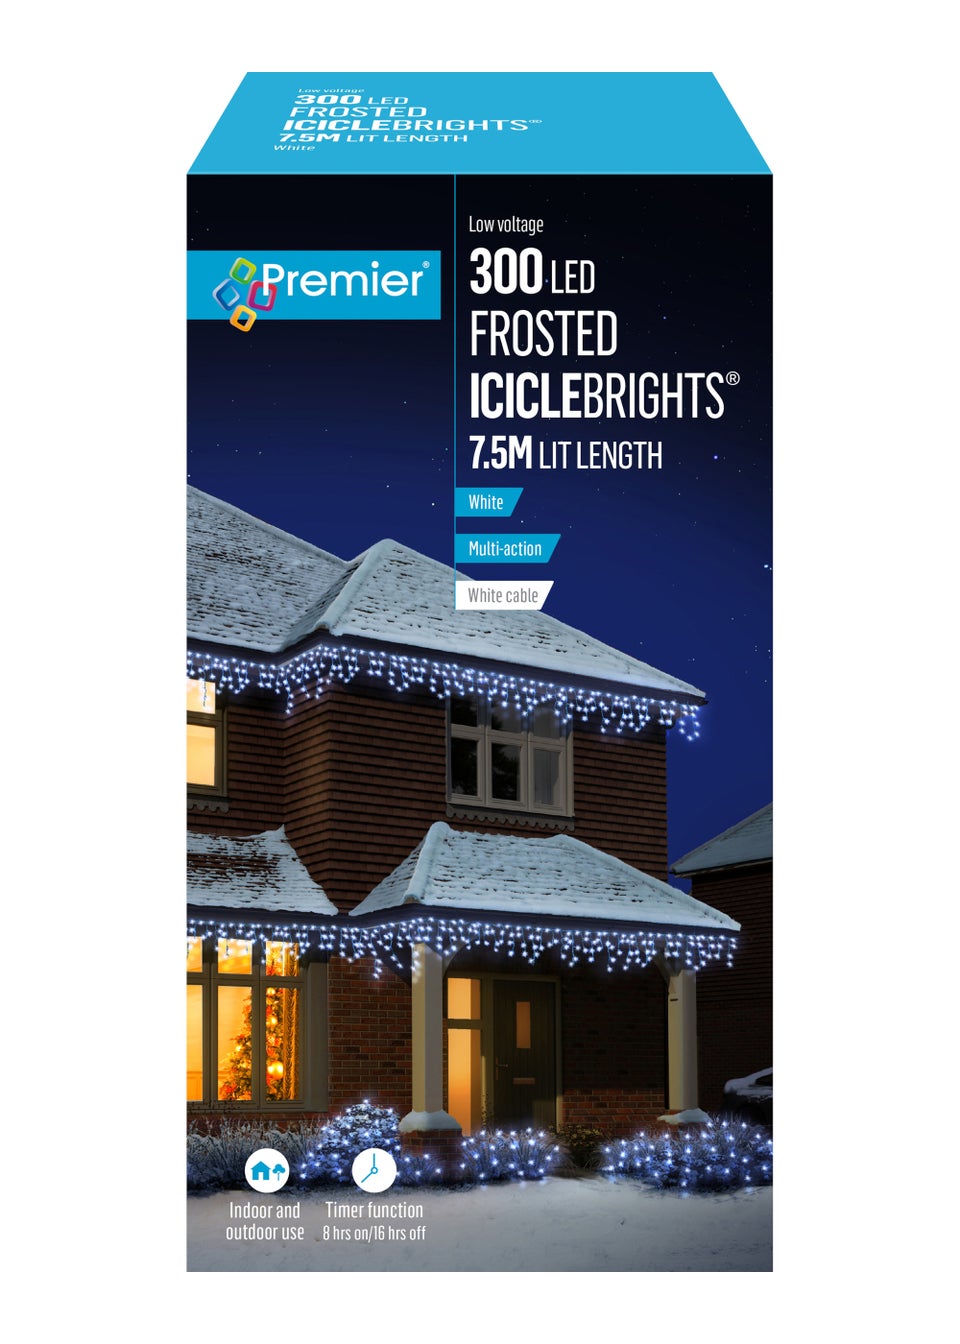 Premier Decorations 300 Blue and White LED Frosted Iciclebrights